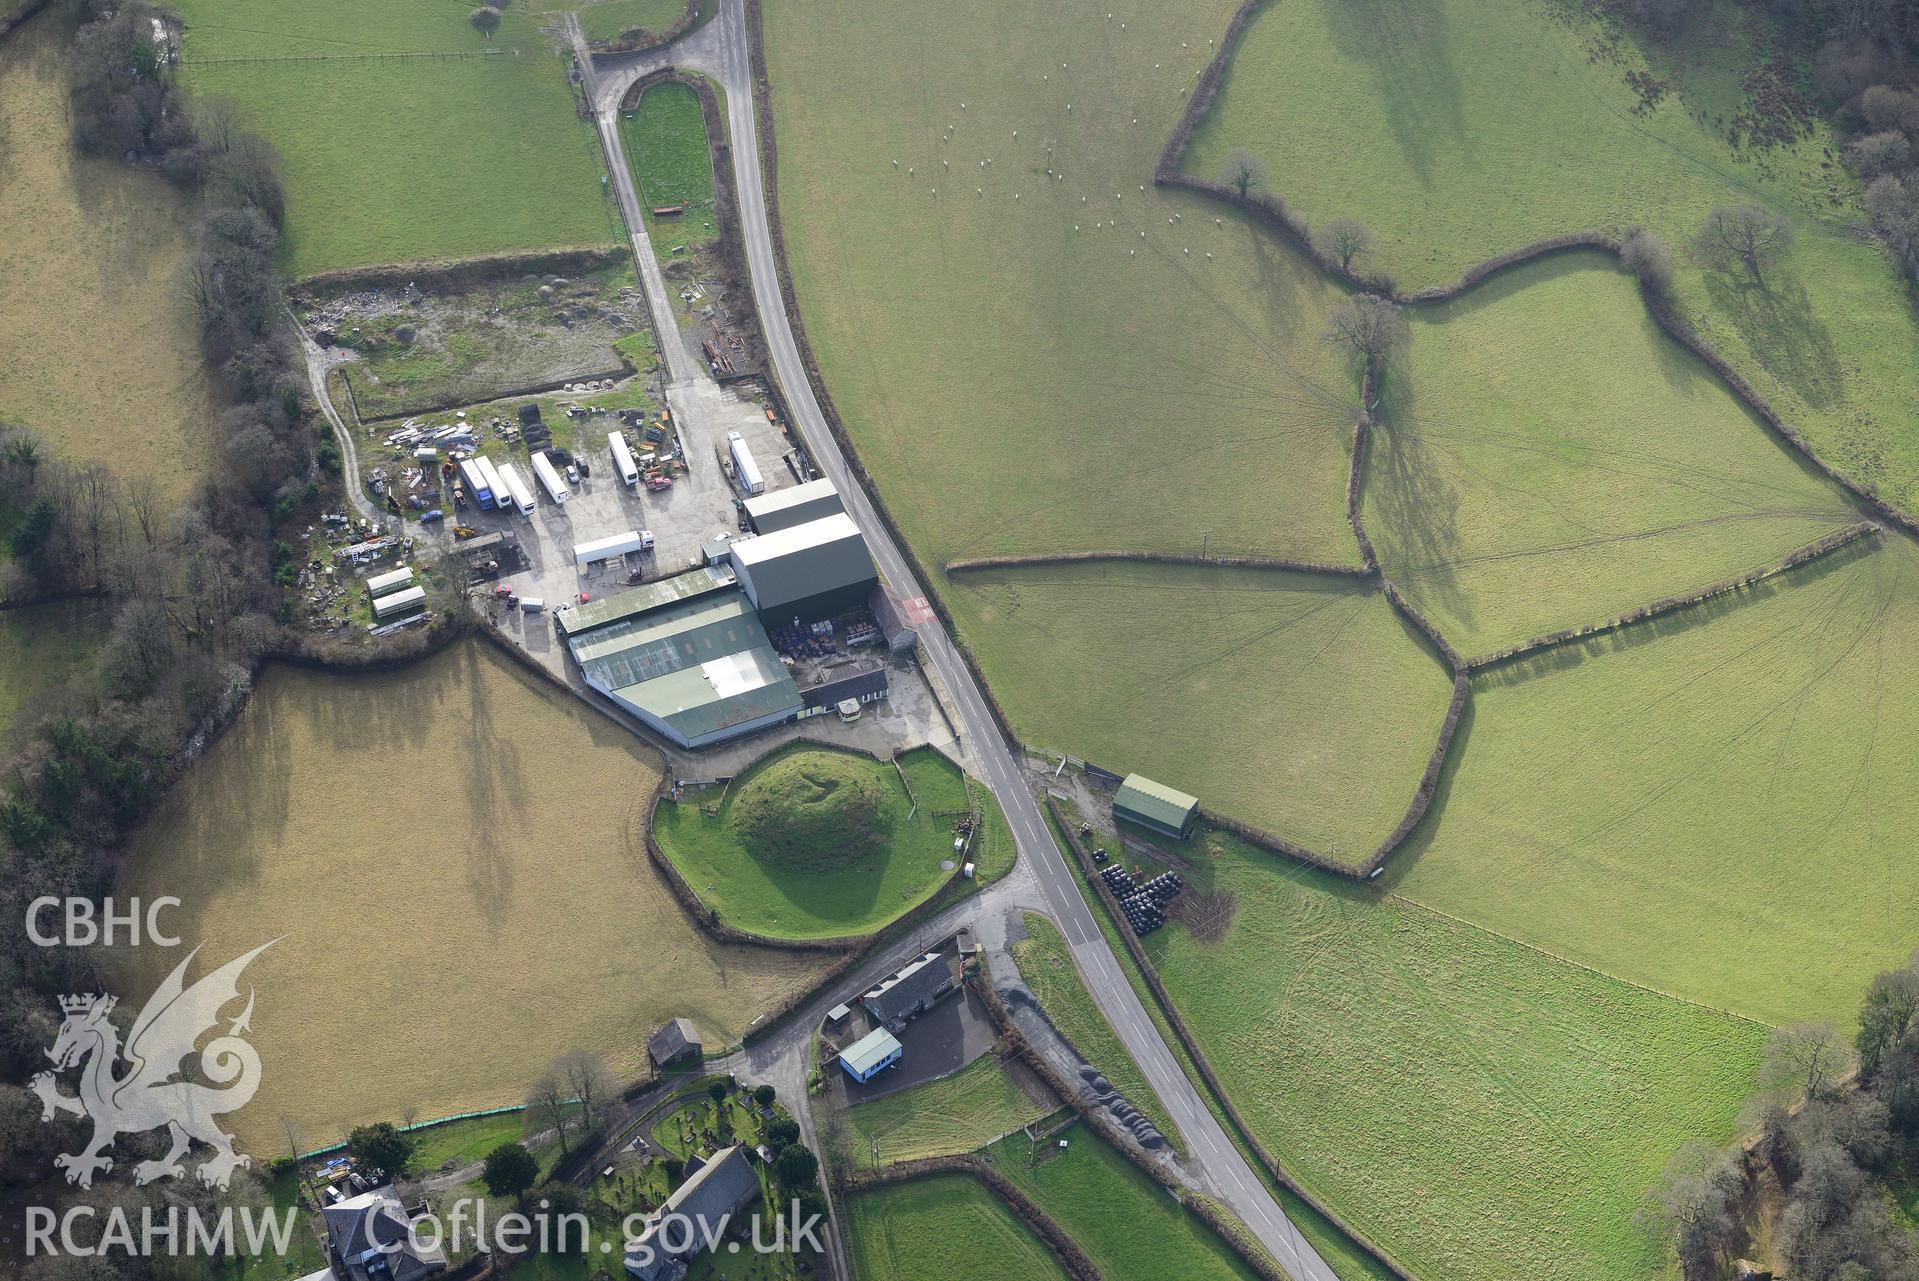 St. Hilary's Church and Vicarage, Castell Trefilan and a possible Medieval borough and later settlement. Oblique aerial photograph taken during the Royal Commission's programme of archaeological aerial reconnaissance by Toby Driver on 6th January 2015.